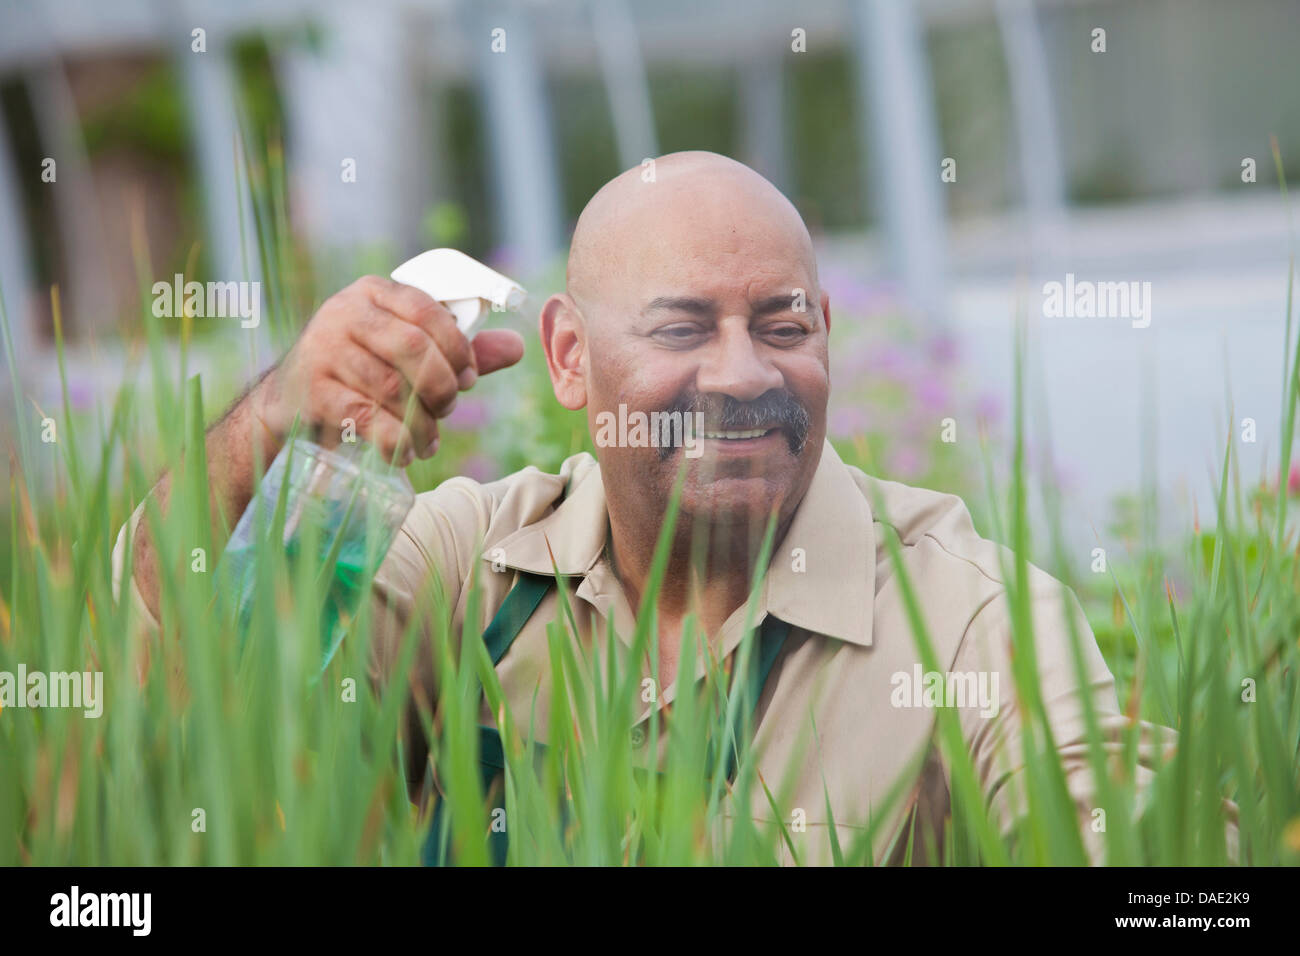 Mature man using insecticide on plants in greenhouse Stock Photo